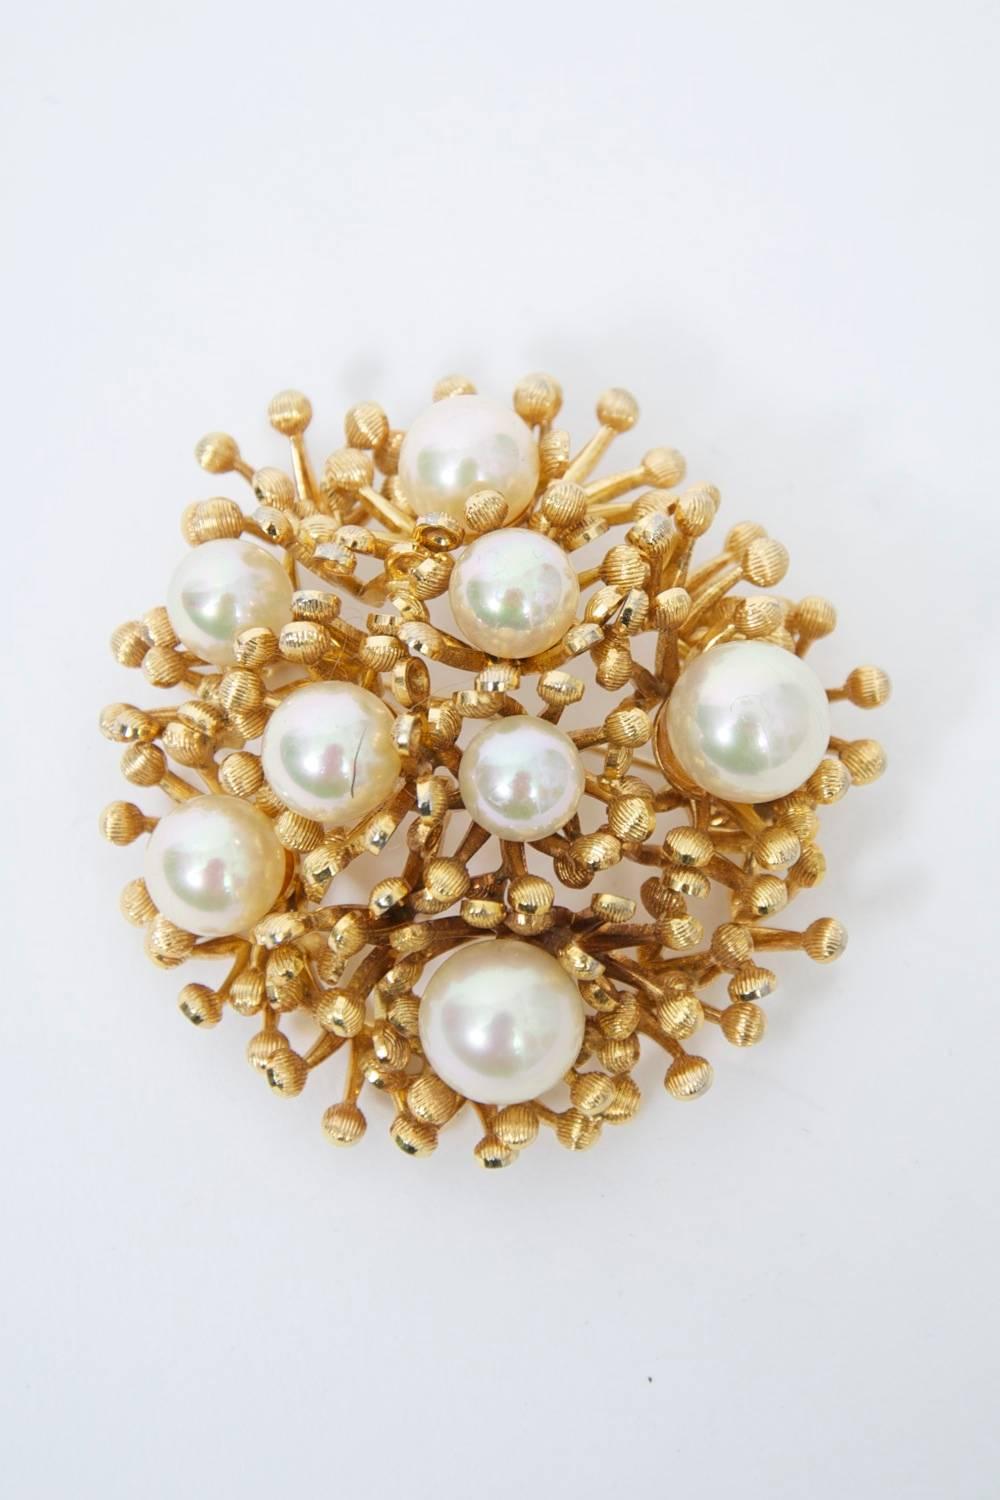 Grosse 1960s Brooch with Pearls In Excellent Condition For Sale In Alford, MA